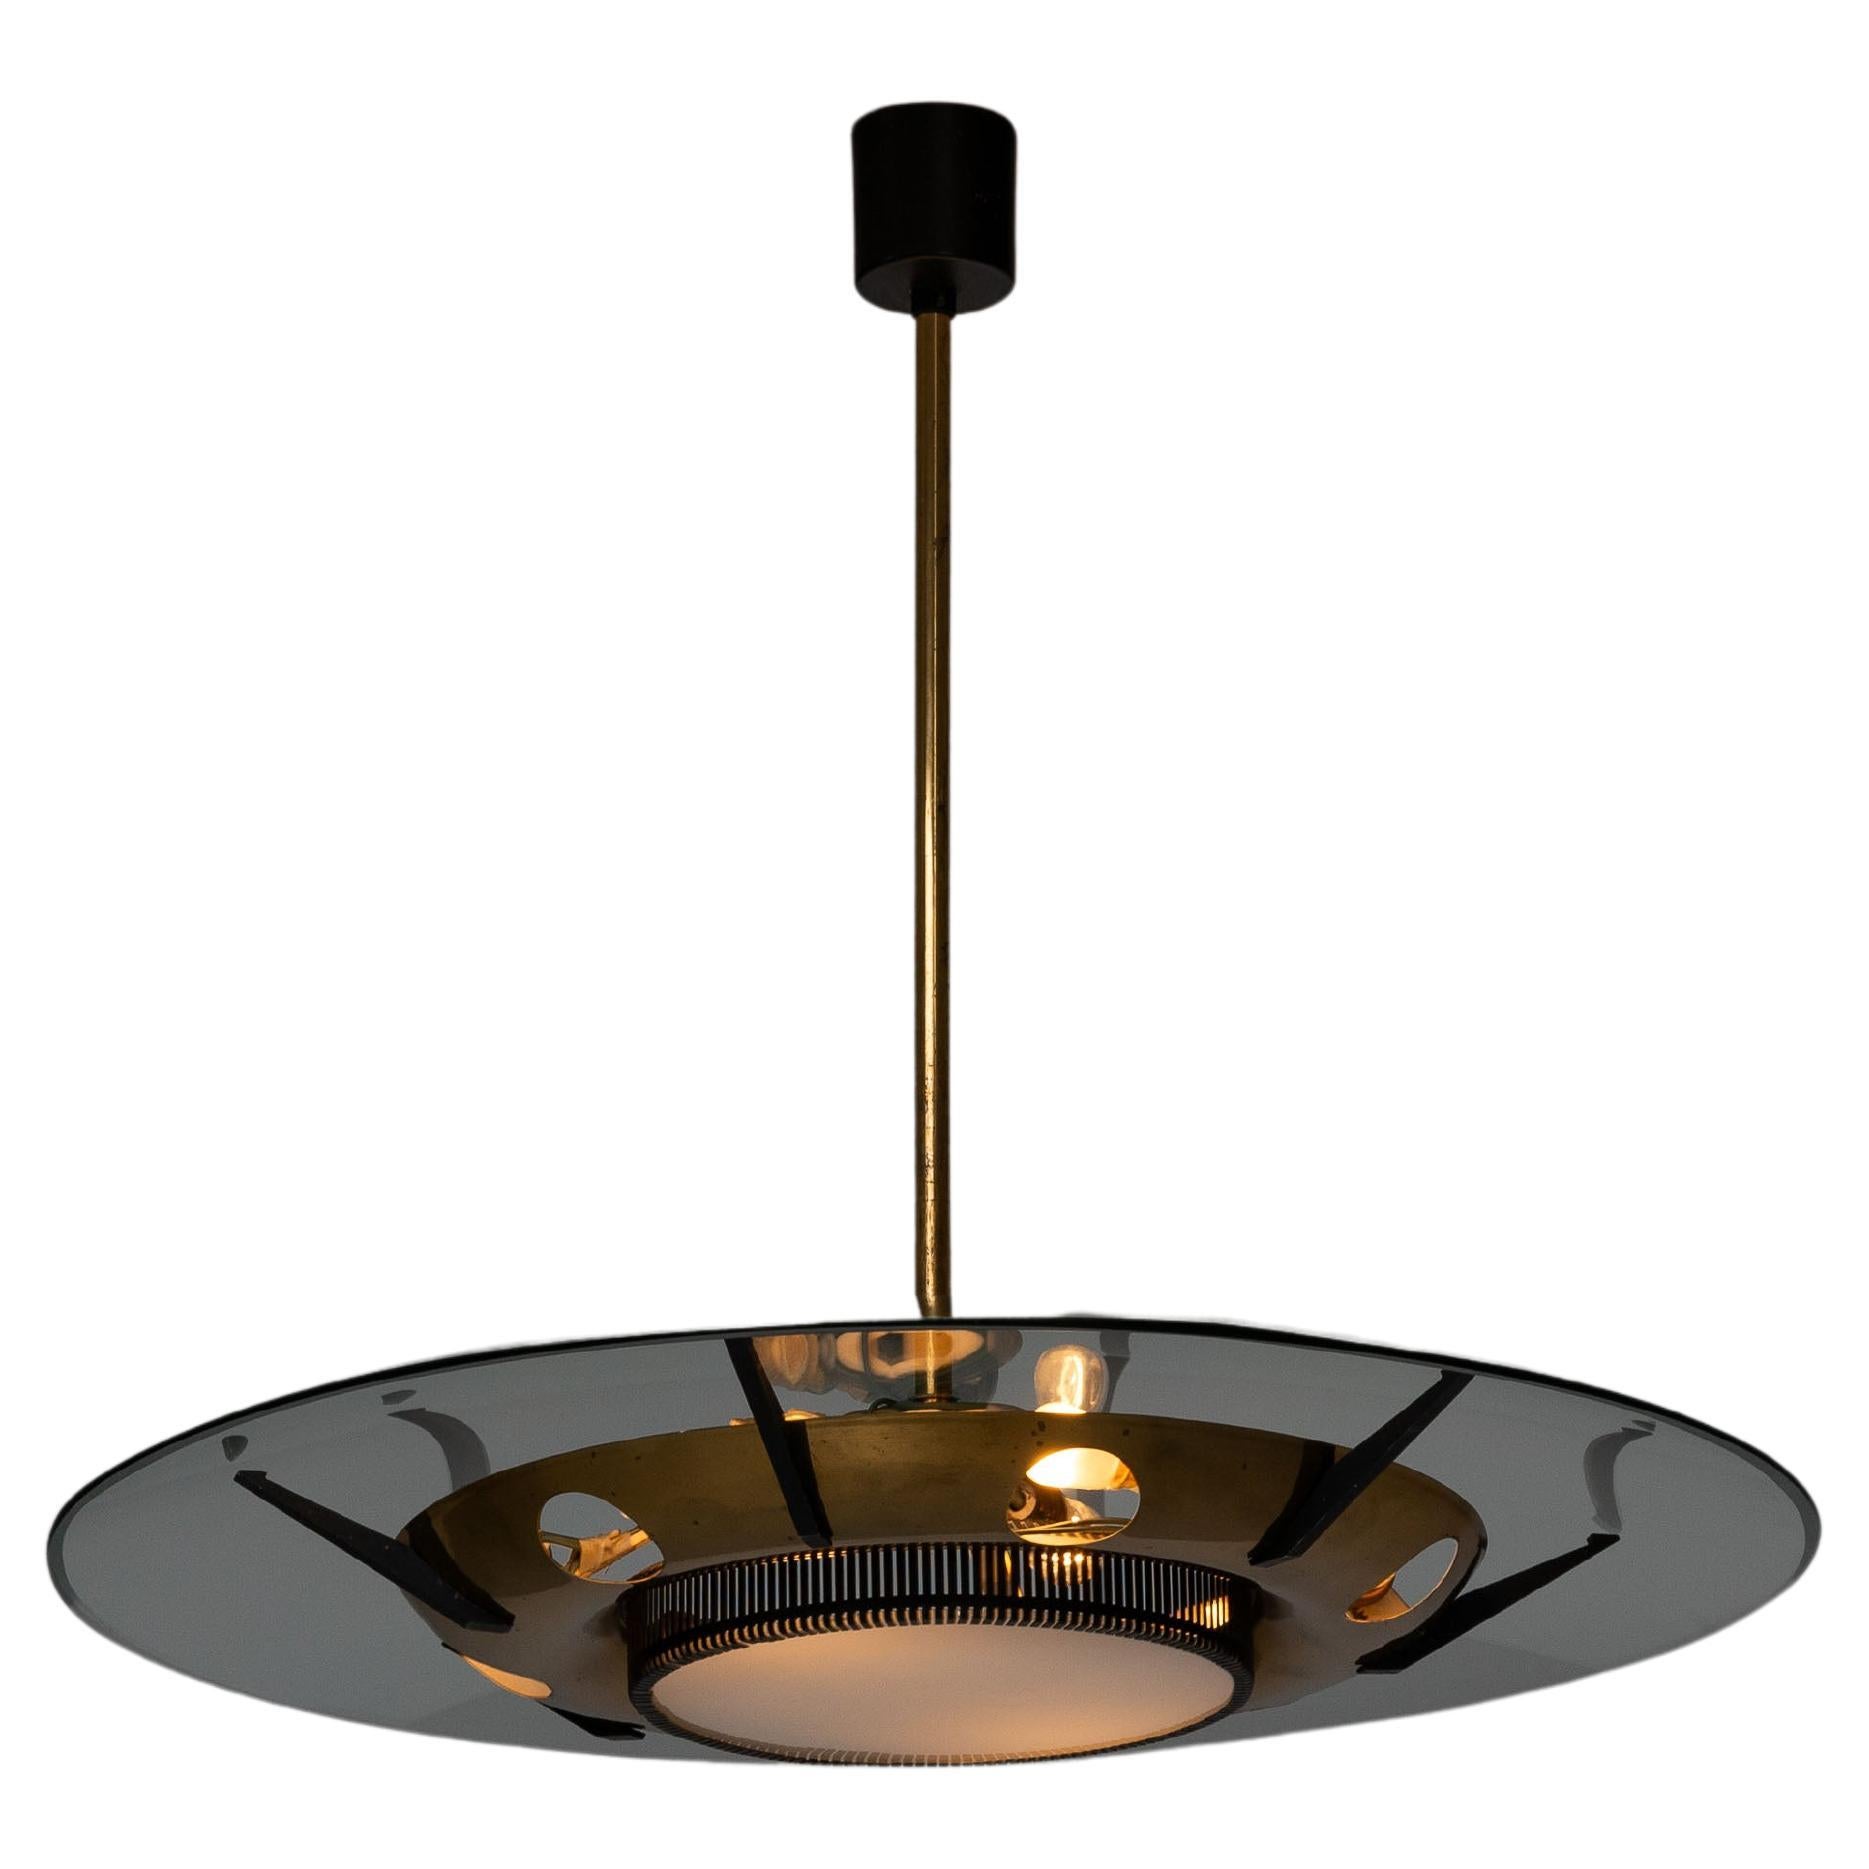 Unique saucer or UFO shaped chandelier designed and manufactured by Stilnovo in Italy in 1960. The lamp is made up of a brass stem supporting a clear glass circle that bends elegant over the structure. A brass round ring is supported by black metal